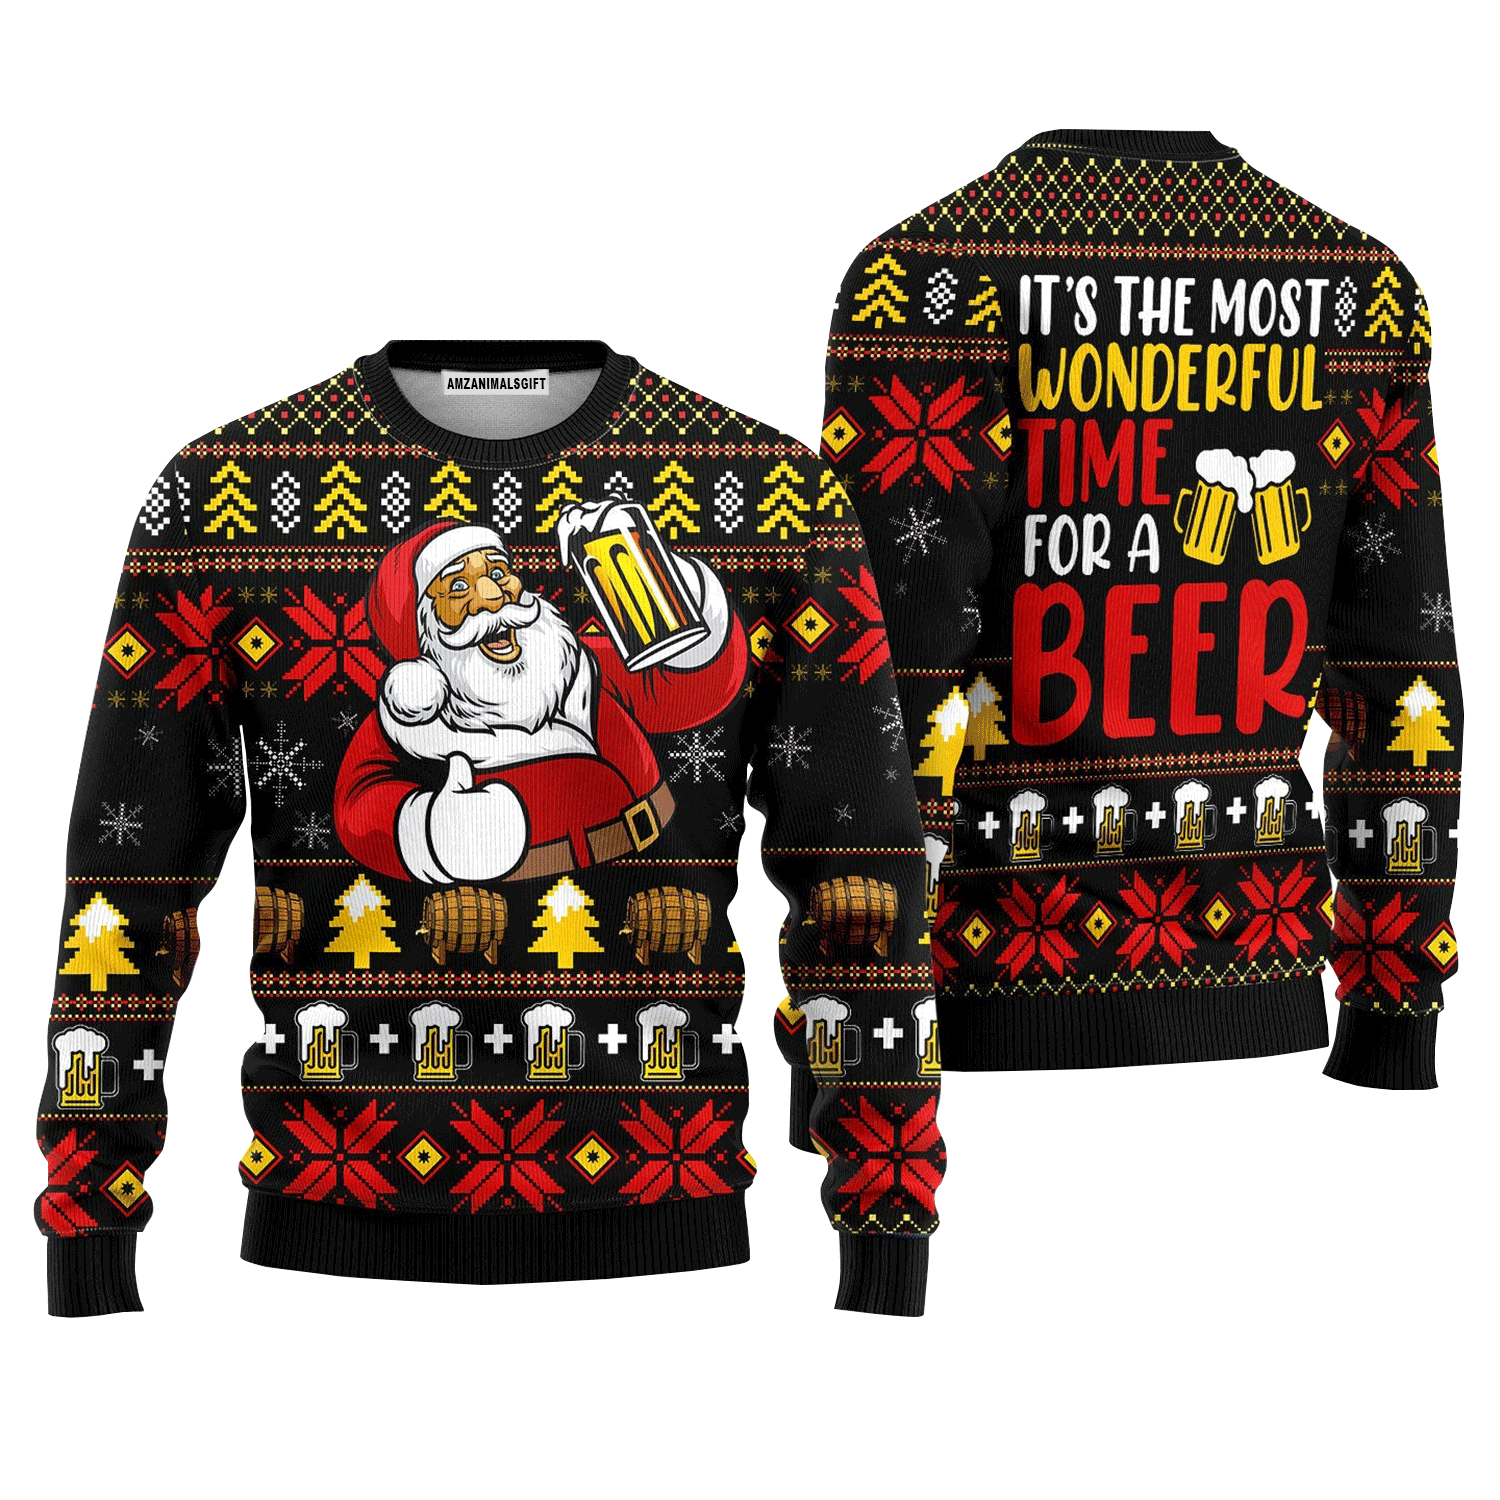 Santa Claus Beer Sweater Wonderful Time For A Beer, Ugly Sweater For Men & Women, Perfect Outfit For Christmas New Year Autumn Winter